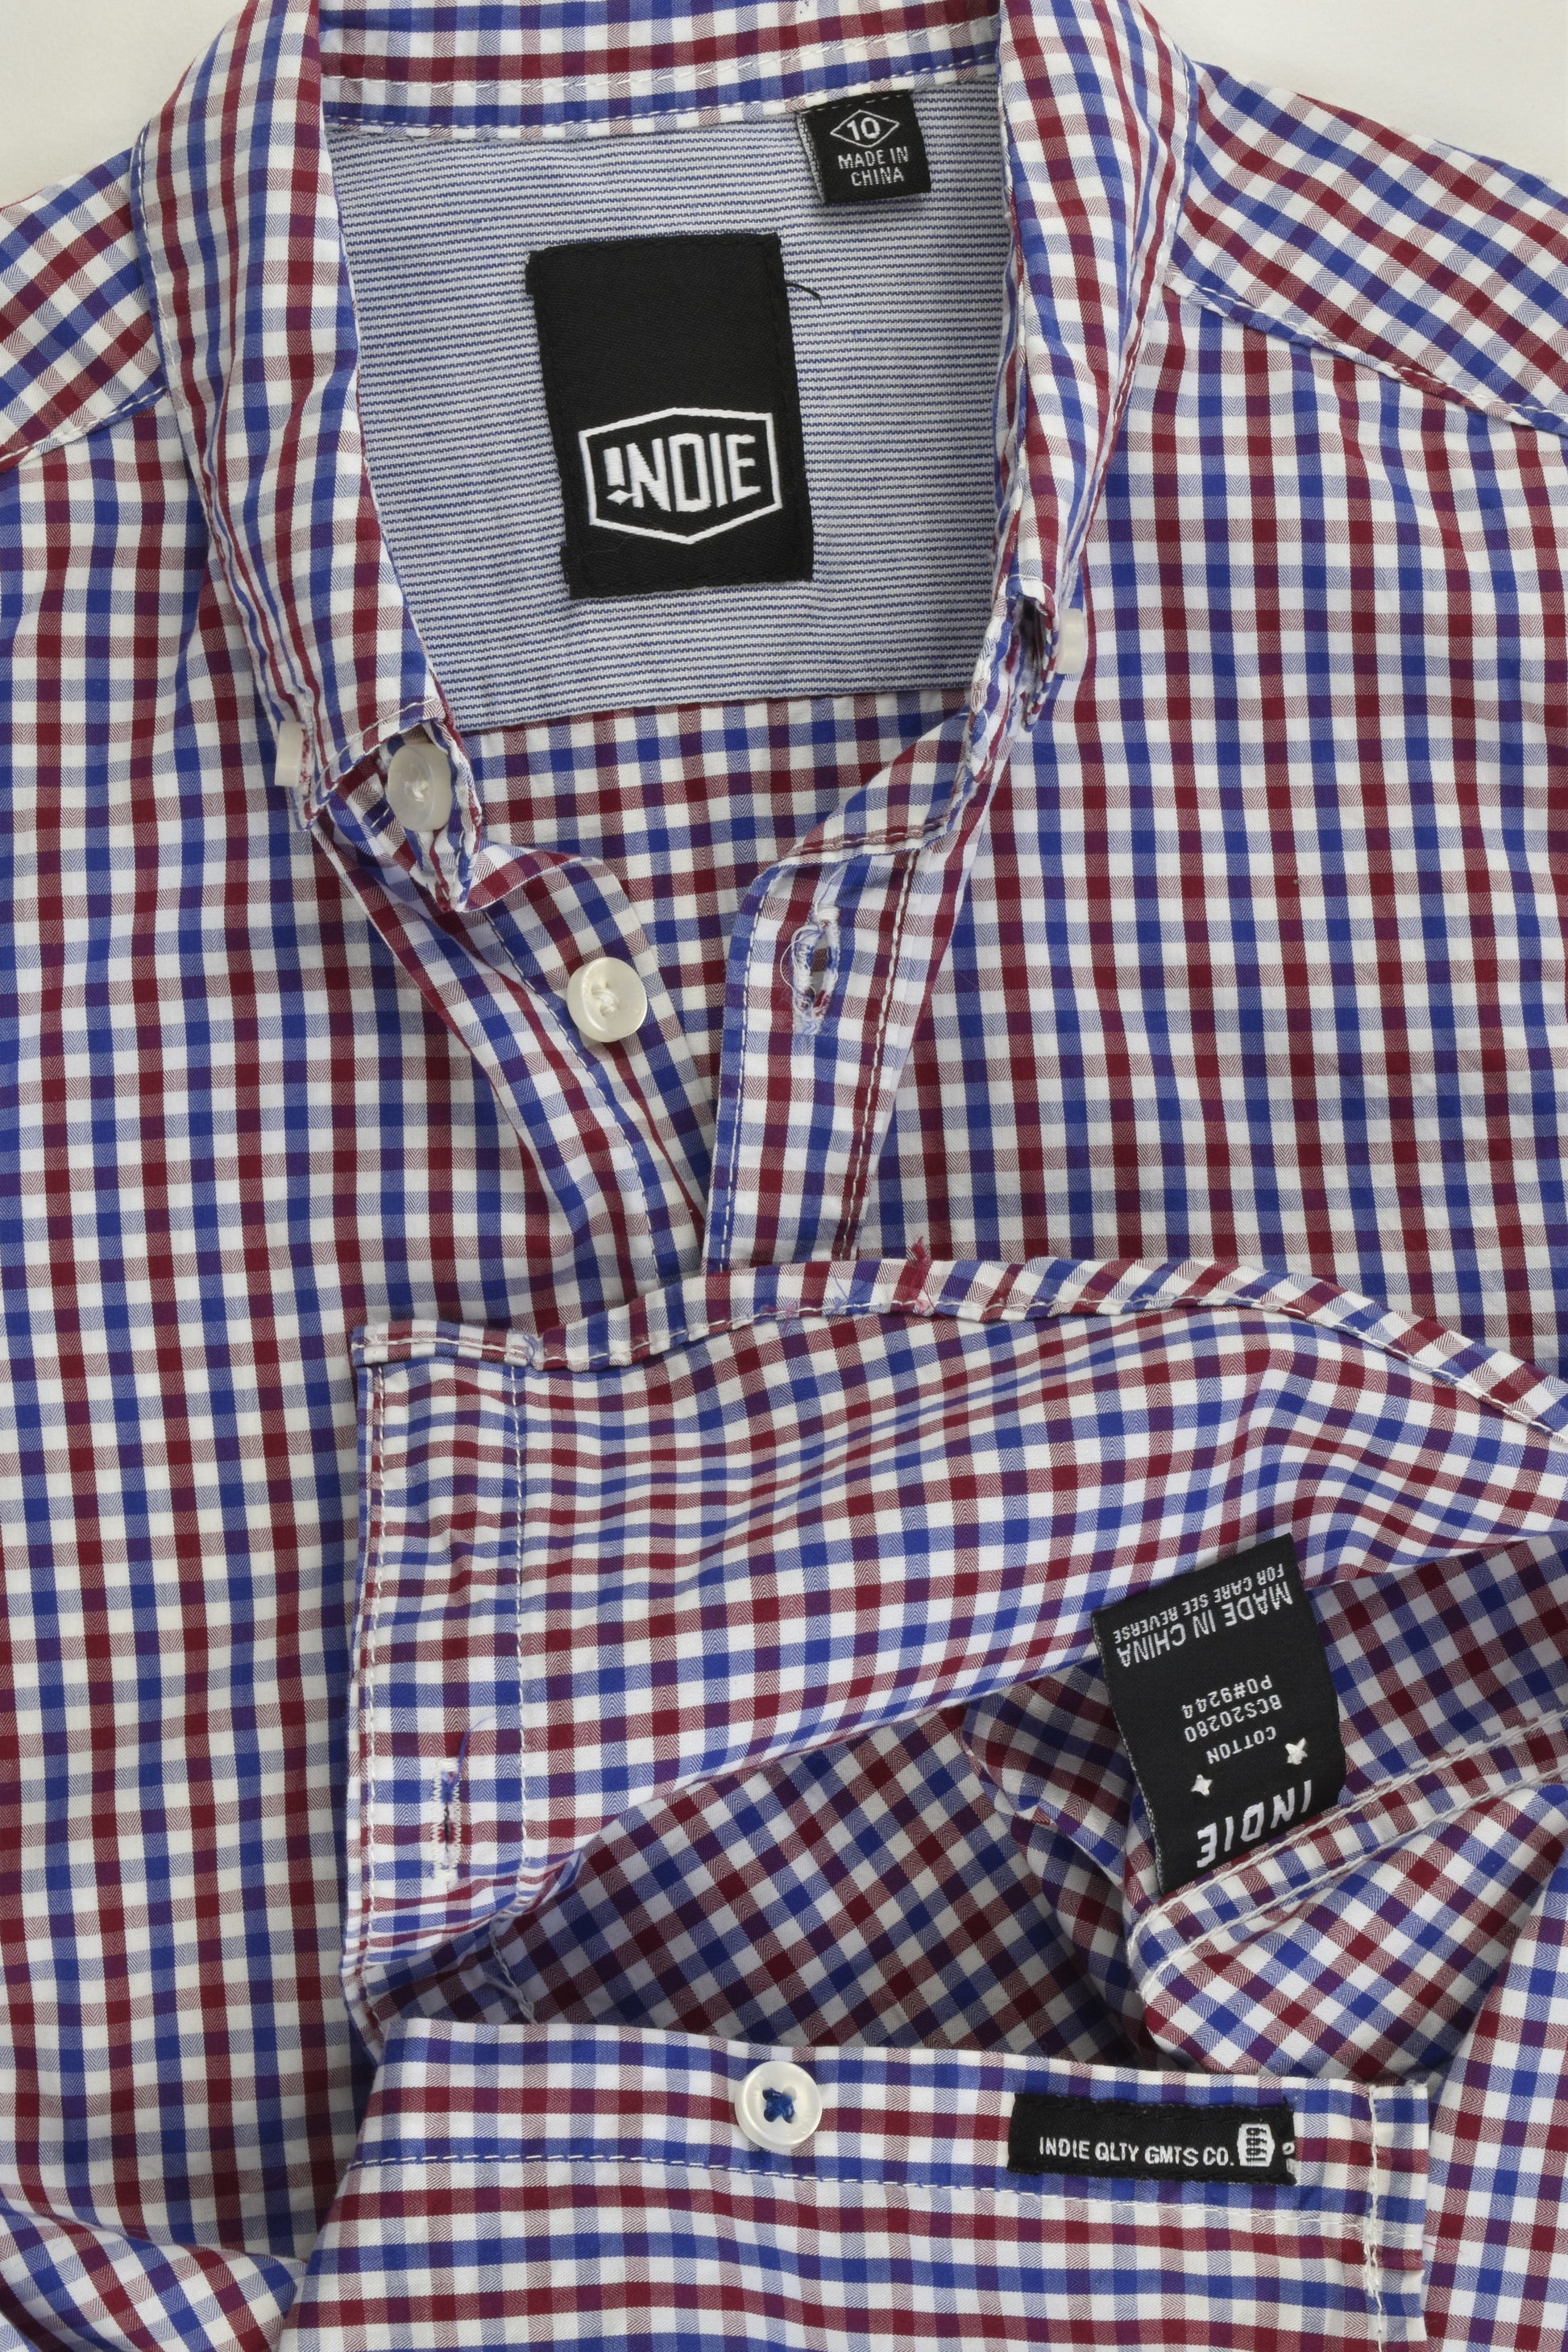 Indie Size 10 Checked Shirt